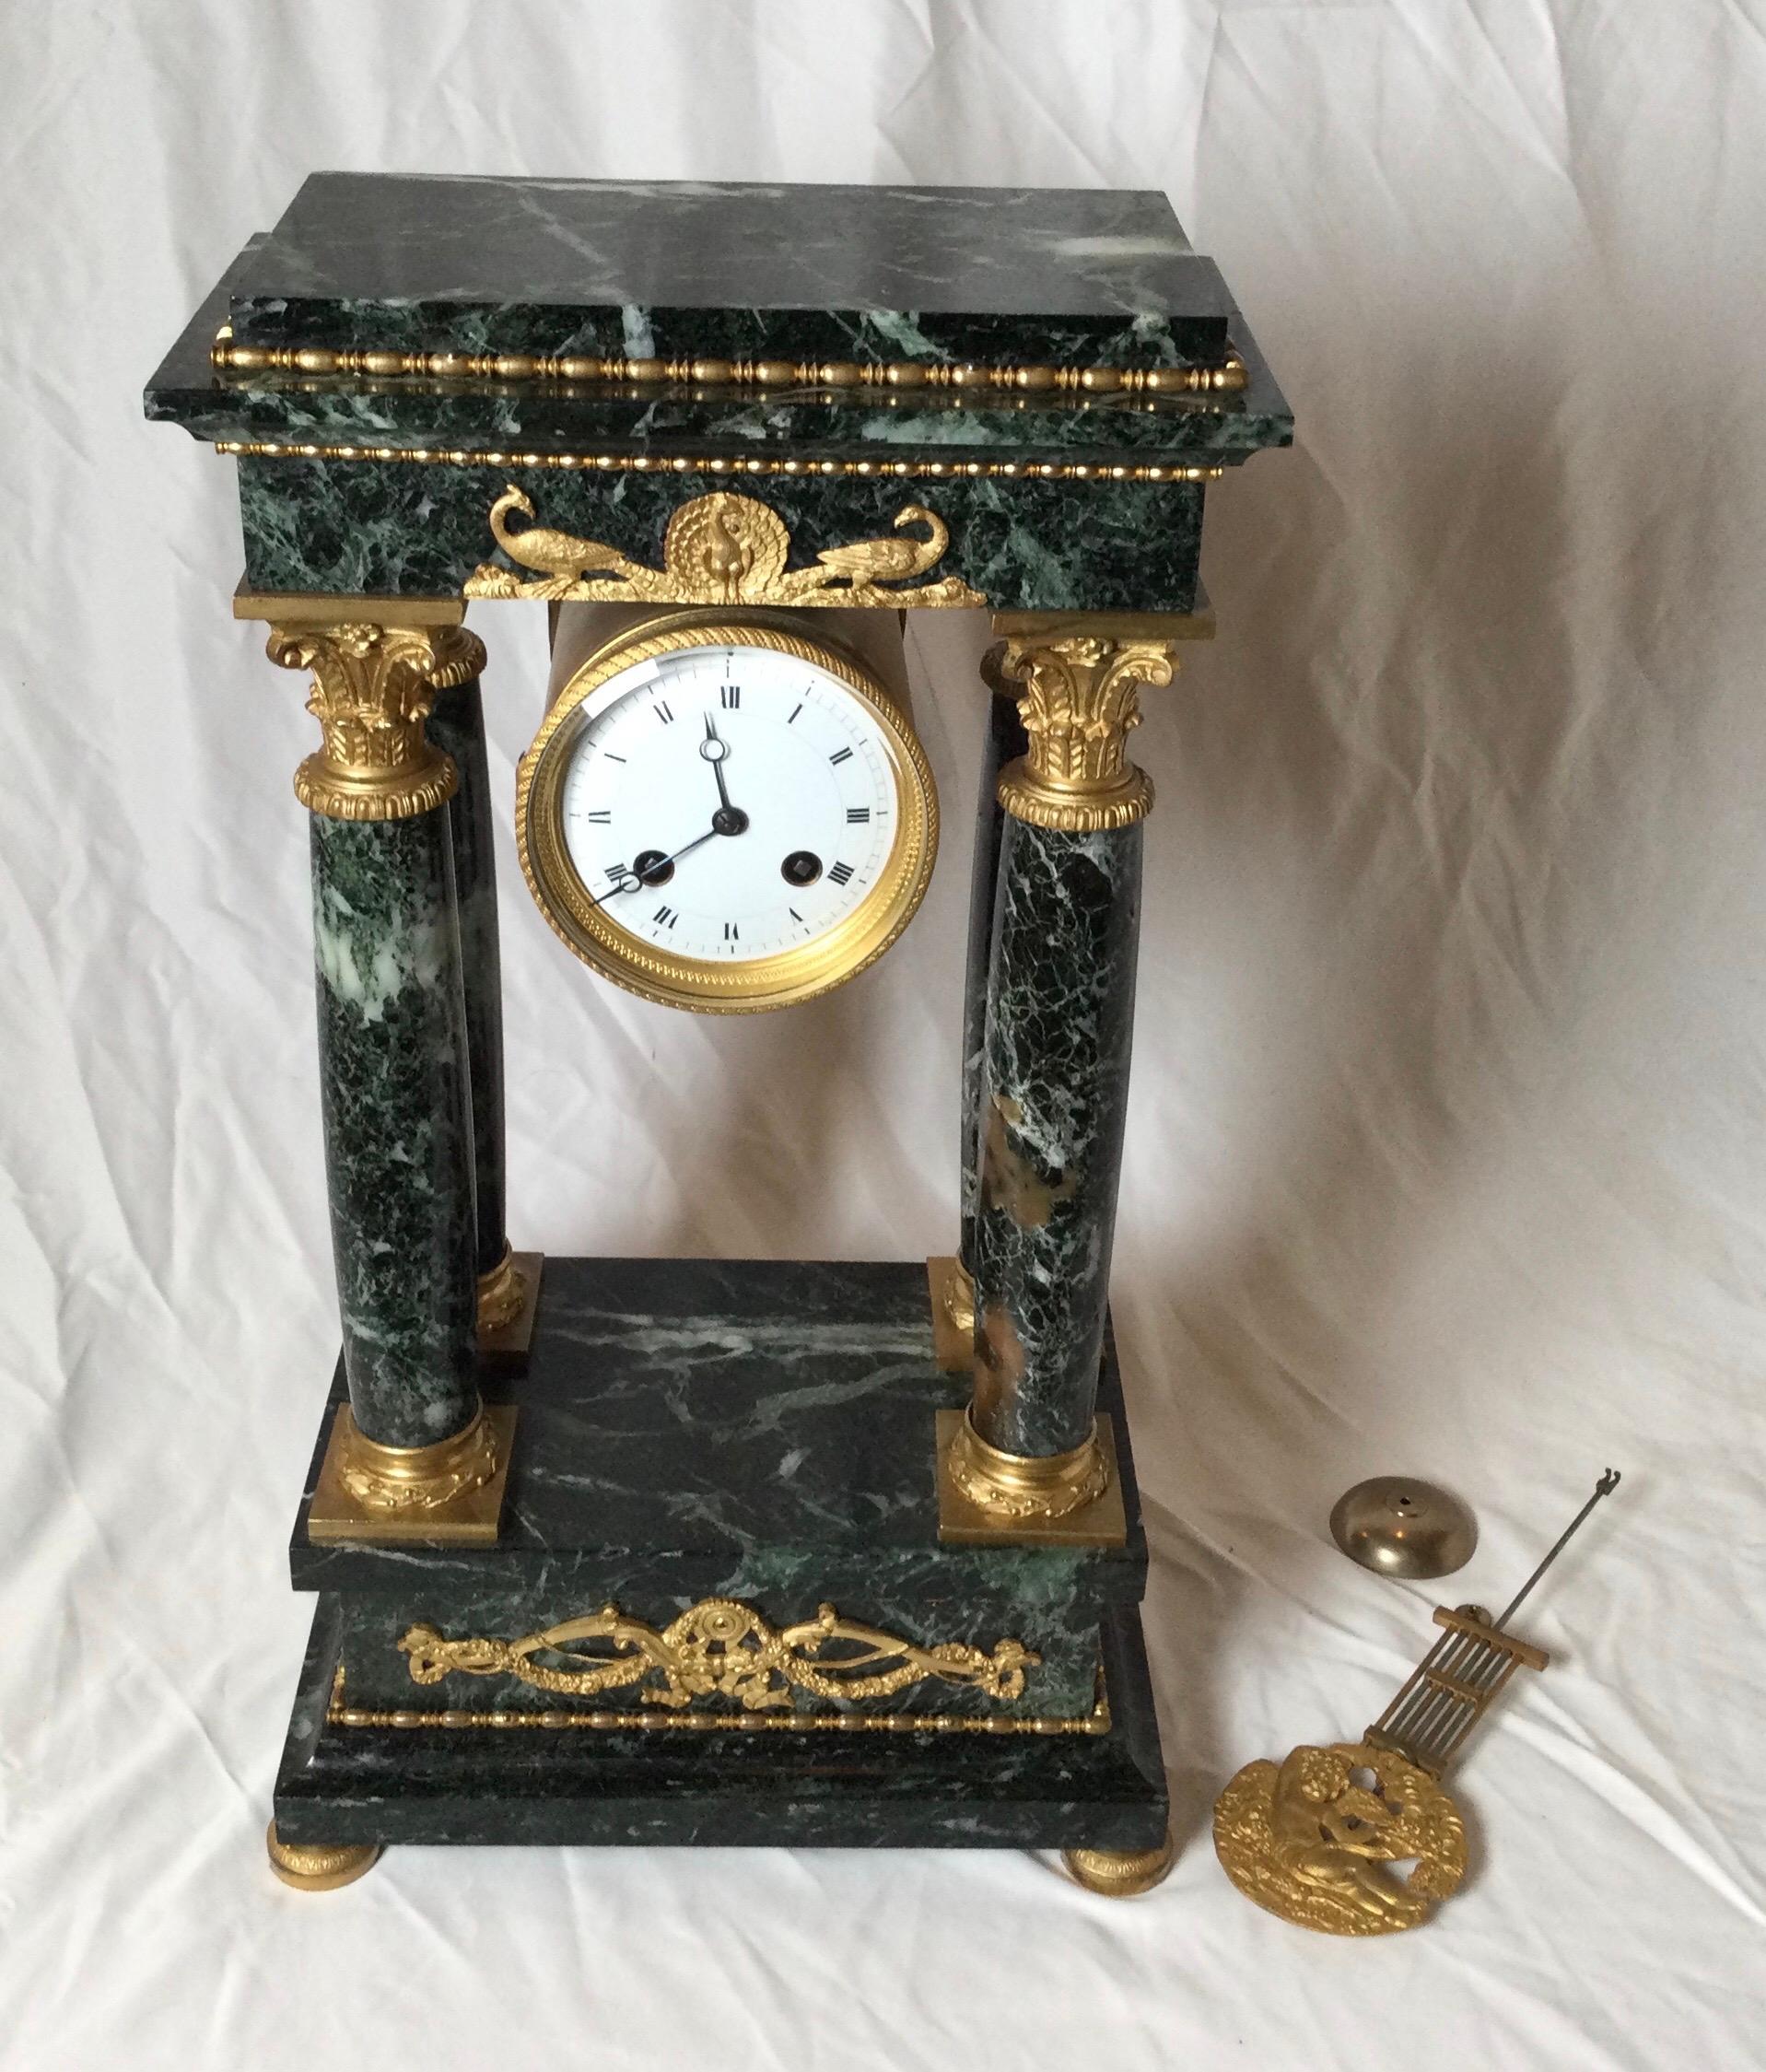 Elegant French Empire Portico clock with ormolu mounts. The classic four column form in a dark varigated green marble with detailed gilt bronze mounts and pendulum. The clock has been serviced and runs but might need adjustment after shipping.